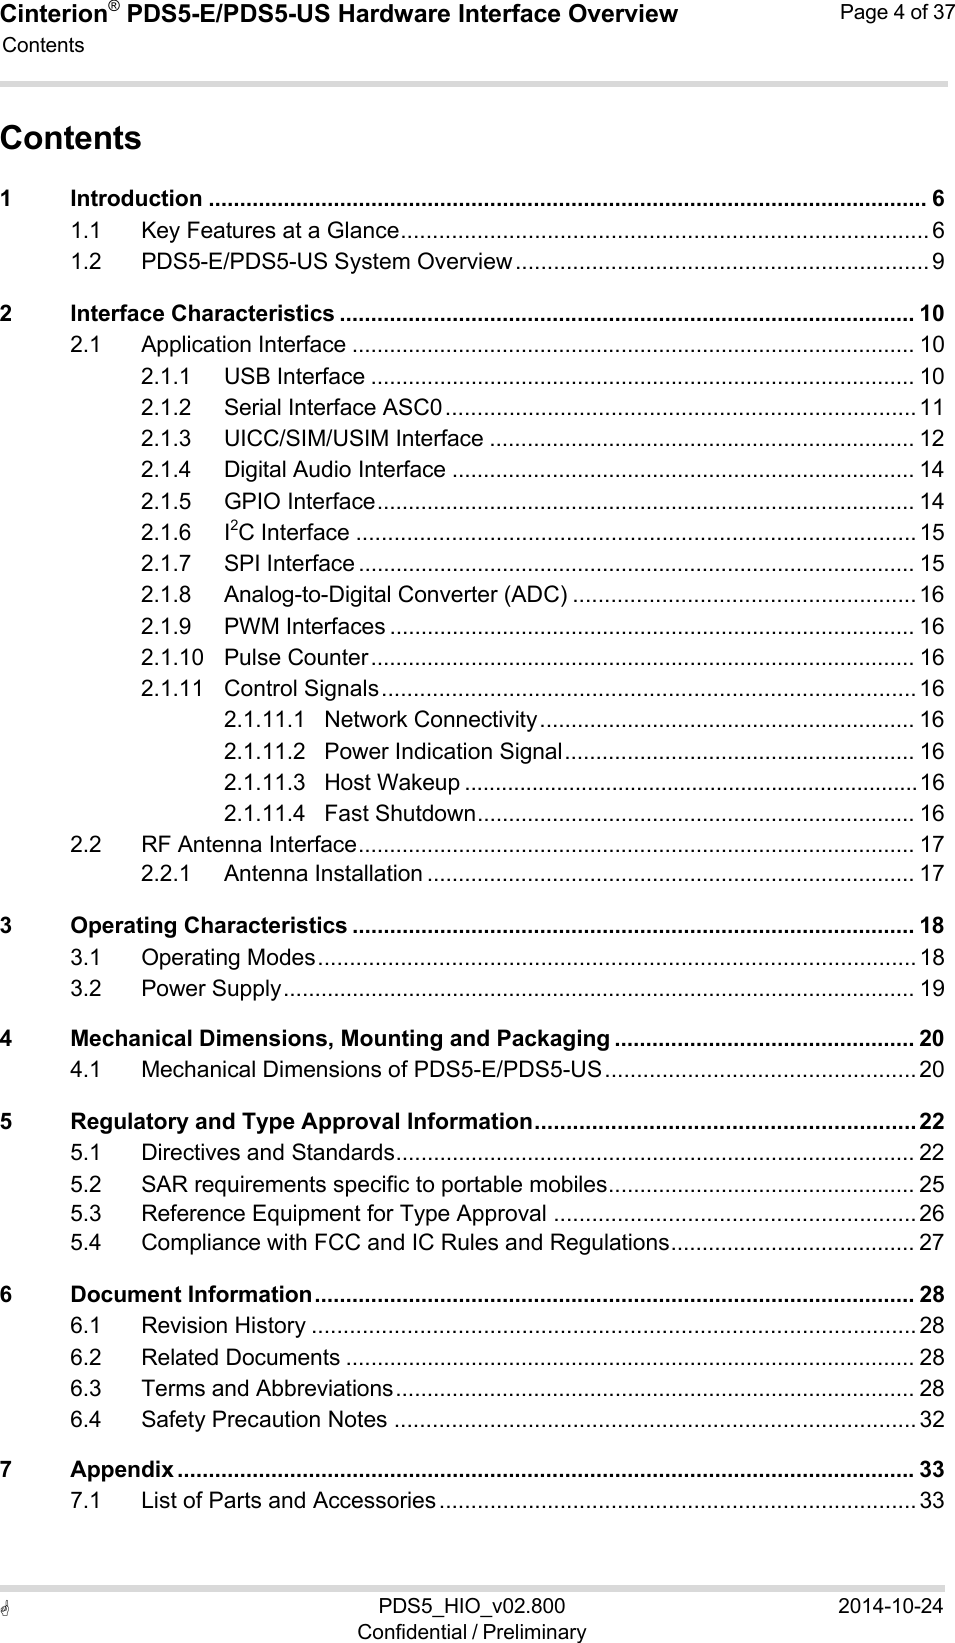 Cinterion®  PDS5-E/PDS5-US Hardware Interface Overview Page 4 of 37 PDS5_HIO_v02.800Confidential / Preliminary2014-10-24  Contents   Contents 1 Introduction ................................................................................................................... 6 1.1 Key Features at a Glance ................................................................................... 6 1.2 PDS5-E/PDS5-US System Overview ................................................................. 9 2 Interface Characteristics ............................................................................................ 10 2.1 Application Interface .......................................................................................... 10 2.1.1 USB Interface ....................................................................................... 10 2.1.2 Serial Interface ASC0 .......................................................................... 11 2.1.3 UICC/SIM/USIM Interface .................................................................... 12 2.1.4 Digital Audio Interface .......................................................................... 14 2.1.5 GPIO Interface ...................................................................................... 14 2.1.6 I2C Interface ........................................................................................ 15 2.1.7 SPI Interface ......................................................................................... 15 2.1.8 Analog-to-Digital Converter (ADC) ...................................................... 16 2.1.9 PWM Interfaces .................................................................................... 16 2.1.10 Pulse Counter ....................................................................................... 16 2.1.11 Control Signals .................................................................................... 16 2.1.11.1 Network Connectivity ............................................................ 16 2.1.11.2 Power Indication Signal ........................................................ 16 2.1.11.3 Host Wakeup .......................................................................... 16 2.1.11.4 Fast Shutdown ...................................................................... 16 2.2 RF Antenna Interface ......................................................................................... 17 2.2.1 Antenna Installation .............................................................................. 17 3 Operating Characteristics .......................................................................................... 18 3.1 Operating Modes .............................................................................................. 18 3.2 Power Supply ..................................................................................................... 19 4 Mechanical Dimensions, Mounting and Packaging ................................................ 20 4.1 Mechanical Dimensions of PDS5-E/PDS5-US ................................................. 20 5 Regulatory and Type Approval Information ............................................................ 22 5.1 Directives and Standards ................................................................................... 22 5.2 SAR requirements specific to portable mobiles ................................................. 25 5.3 Reference Equipment for Type Approval ......................................................... 26 5.4 Compliance with FCC and IC Rules and Regulations ....................................... 27 6 Document Information ................................................................................................ 28 6.1 Revision History ............................................................................................... 28 6.2 Related Documents ........................................................................................... 28 6.3 Terms and Abbreviations ................................................................................... 28 6.4 Safety Precaution Notes .................................................................................. 32 7 Appendix ...................................................................................................................... 33 7.1 List of Parts and Accessories ........................................................................... 33 